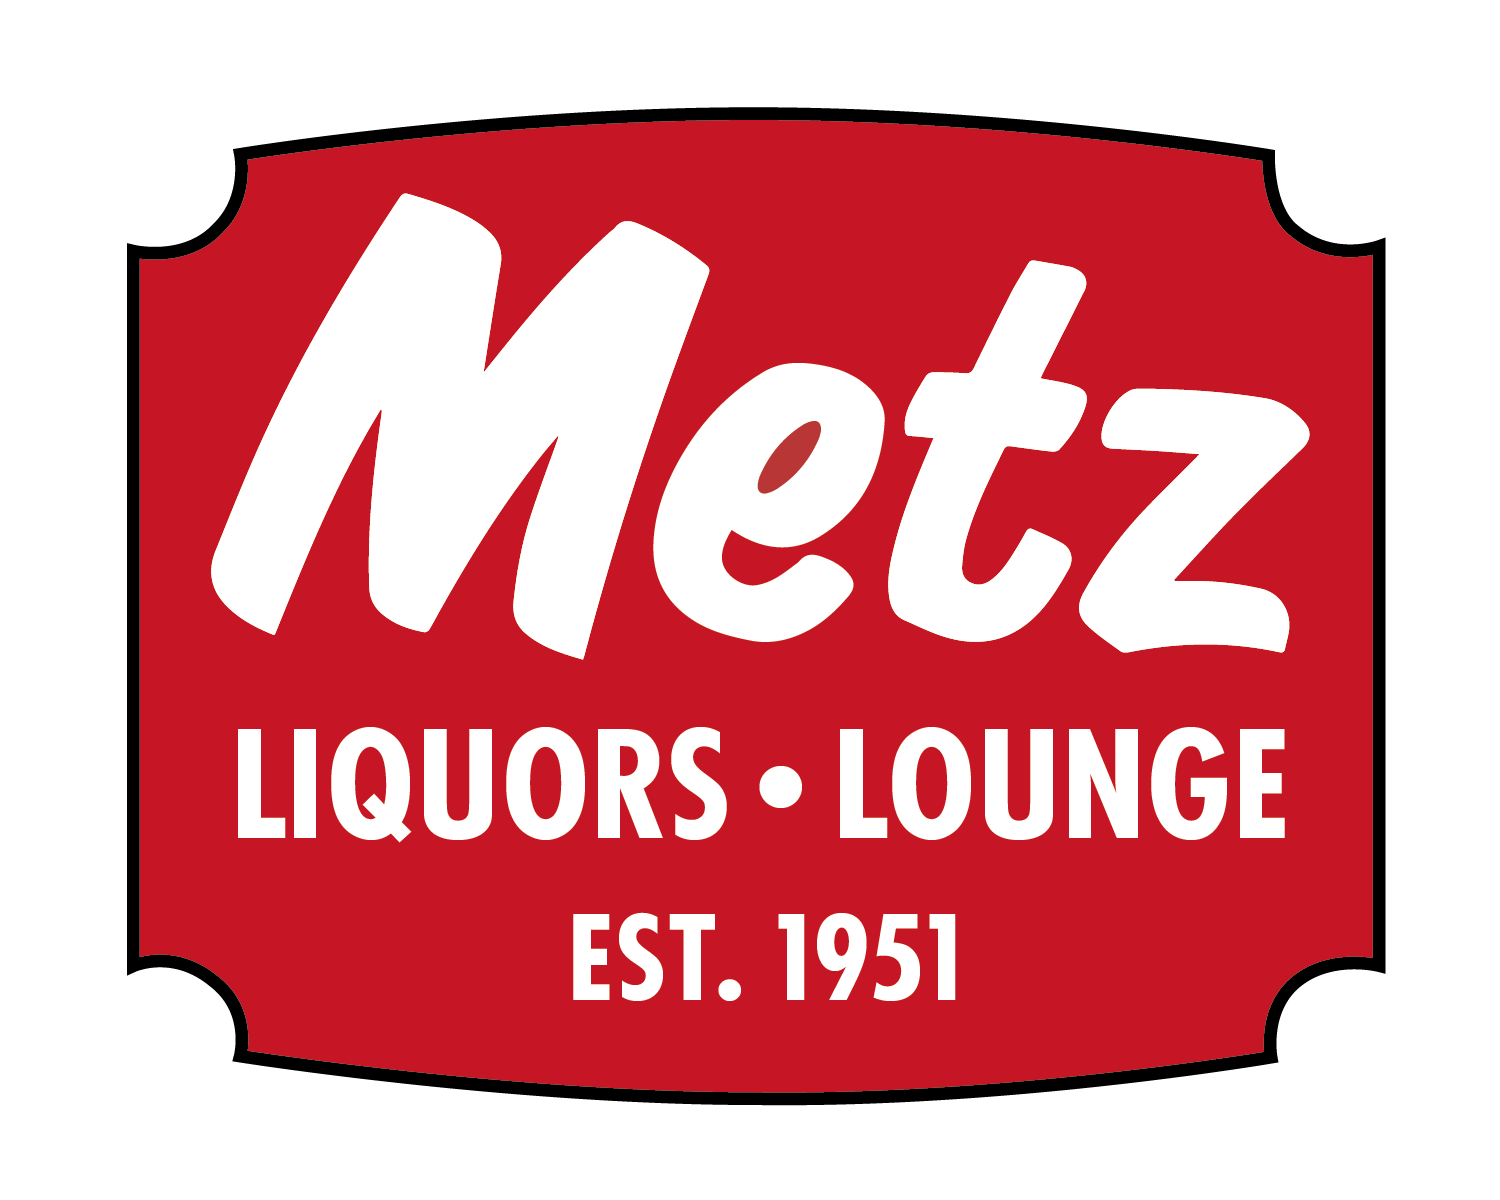 Metz Liquors & Lounge. Established in 1951 Logo. Red banner with "Metz" written in a calligraphic font.